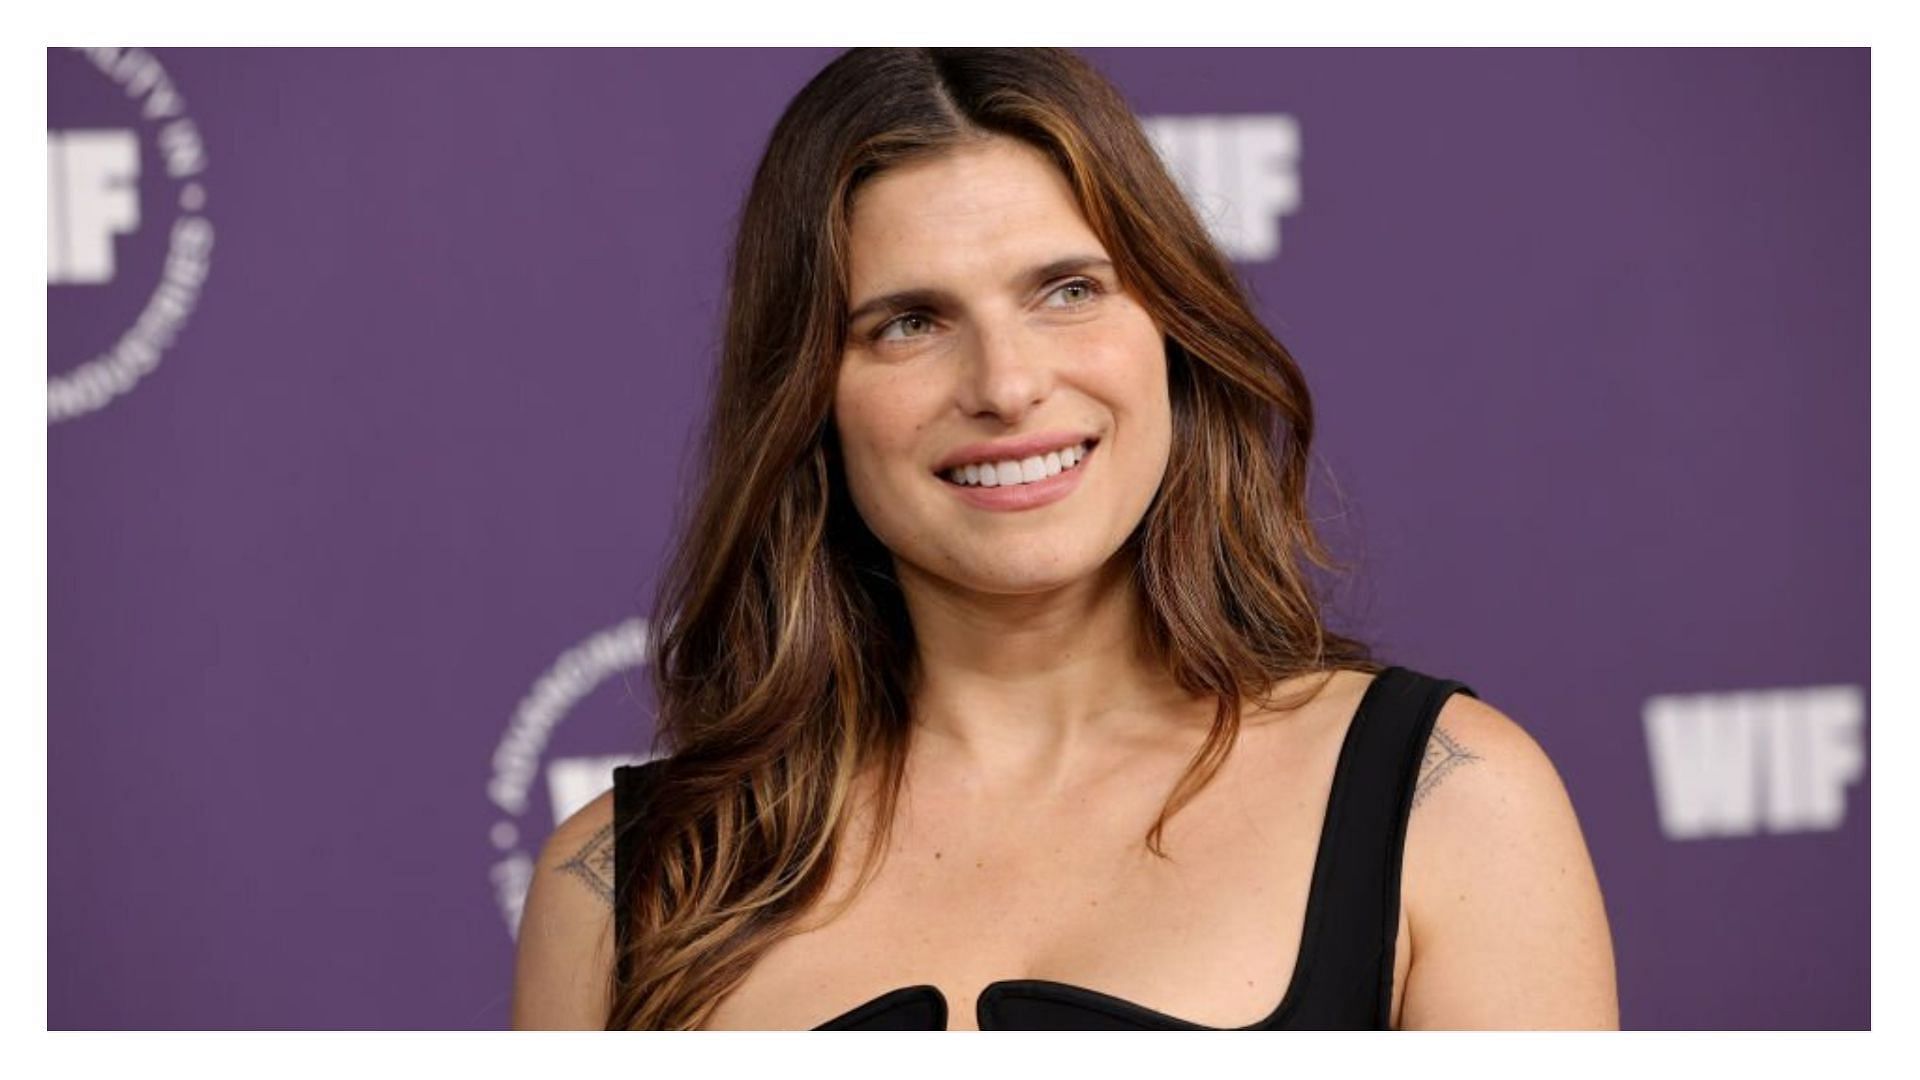 Lake Bell attends Women in Film&#039;s Annual Award Ceremony at The Academy Museum of Motion Pictures (Image via Emma McIntyre/Getty Images)